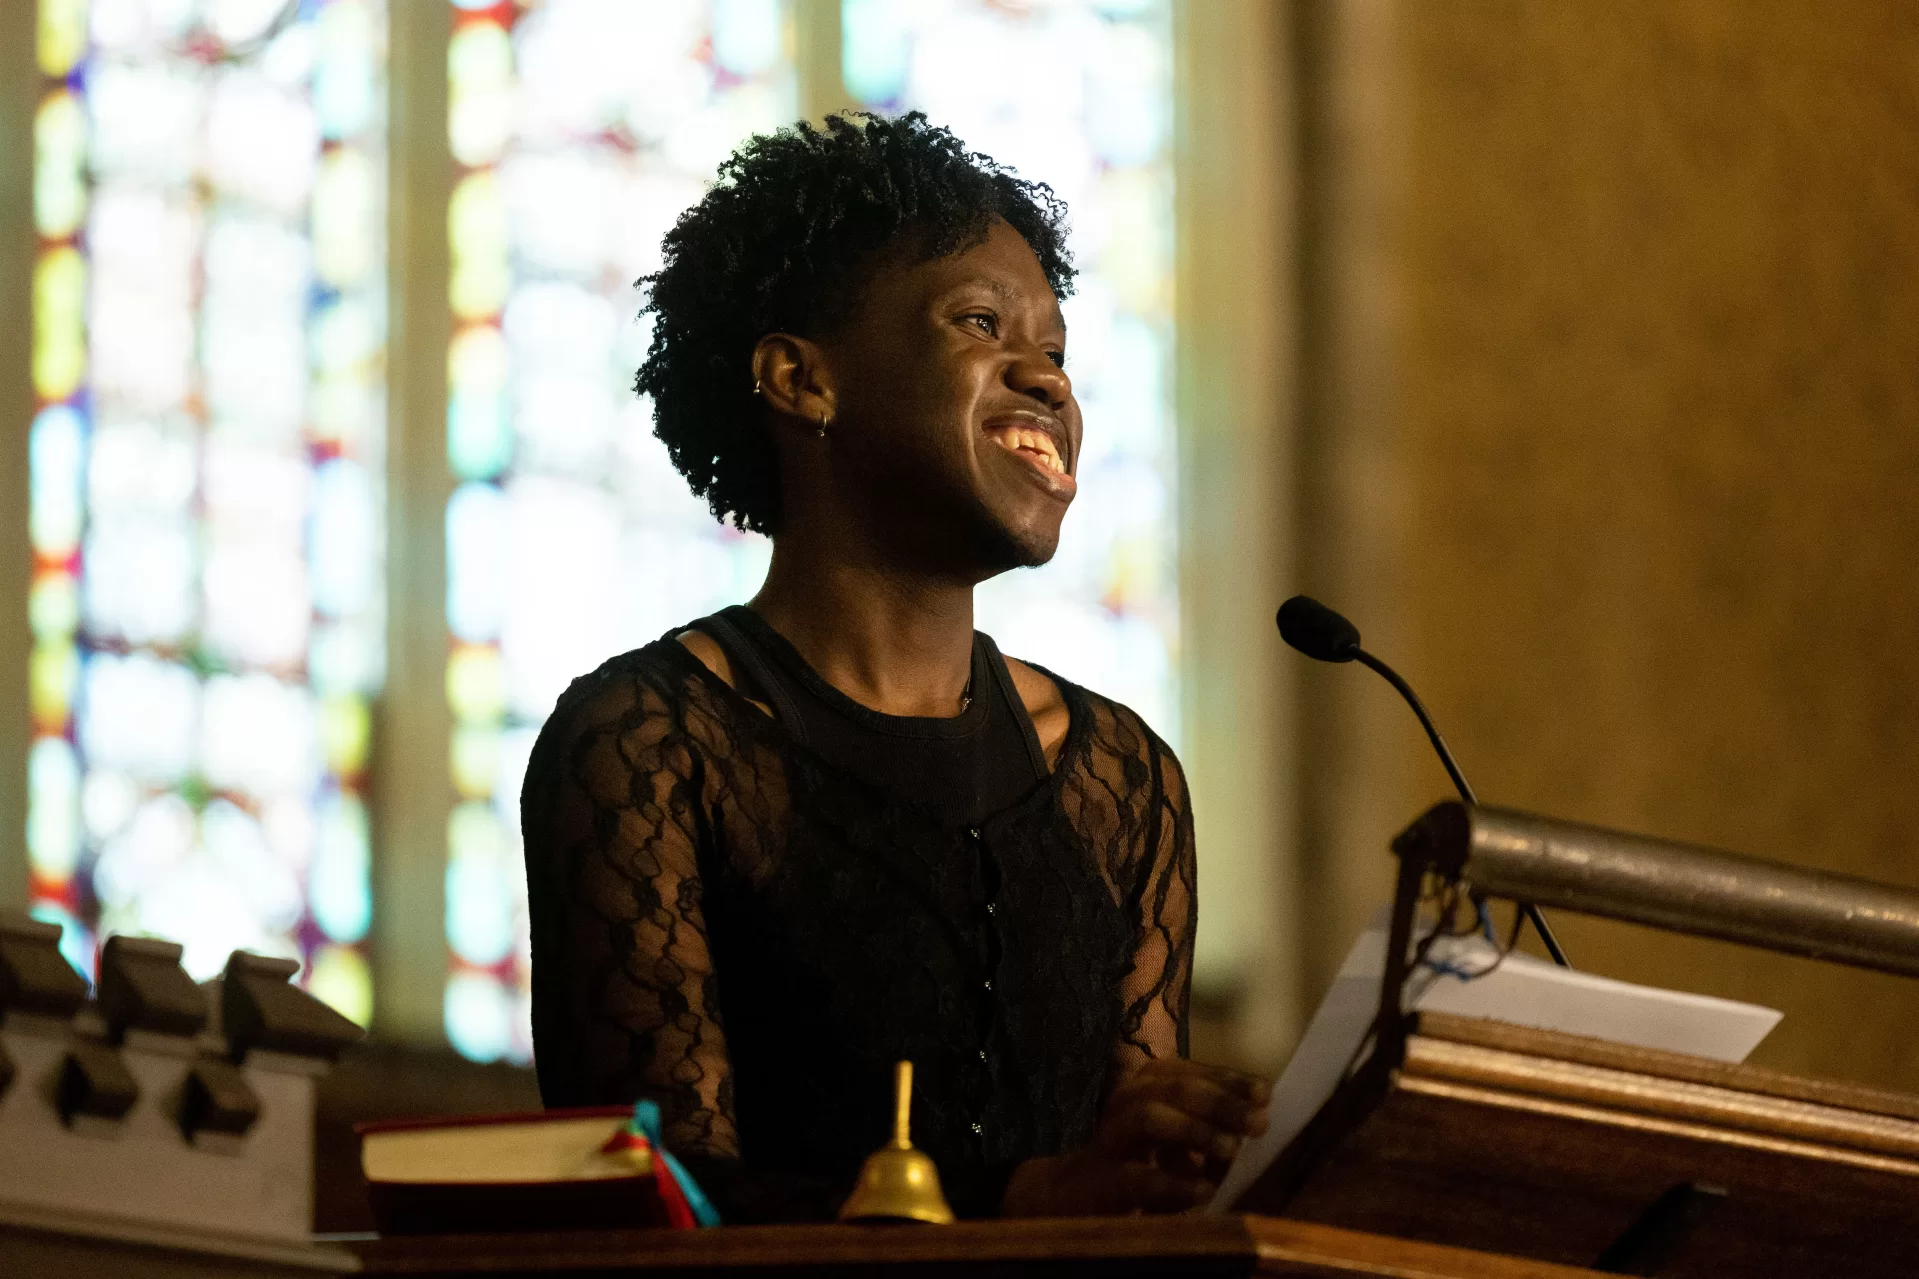 Sam Jean-Francois ’23, an Africana major from Medford, Mass., offers the student welcome during the college's Martin Luther King Jr. Day observance in the Peter J. Gomes Chapel on Jan. 16. 2023. (Phyllis Graber Jensen/Bates College)